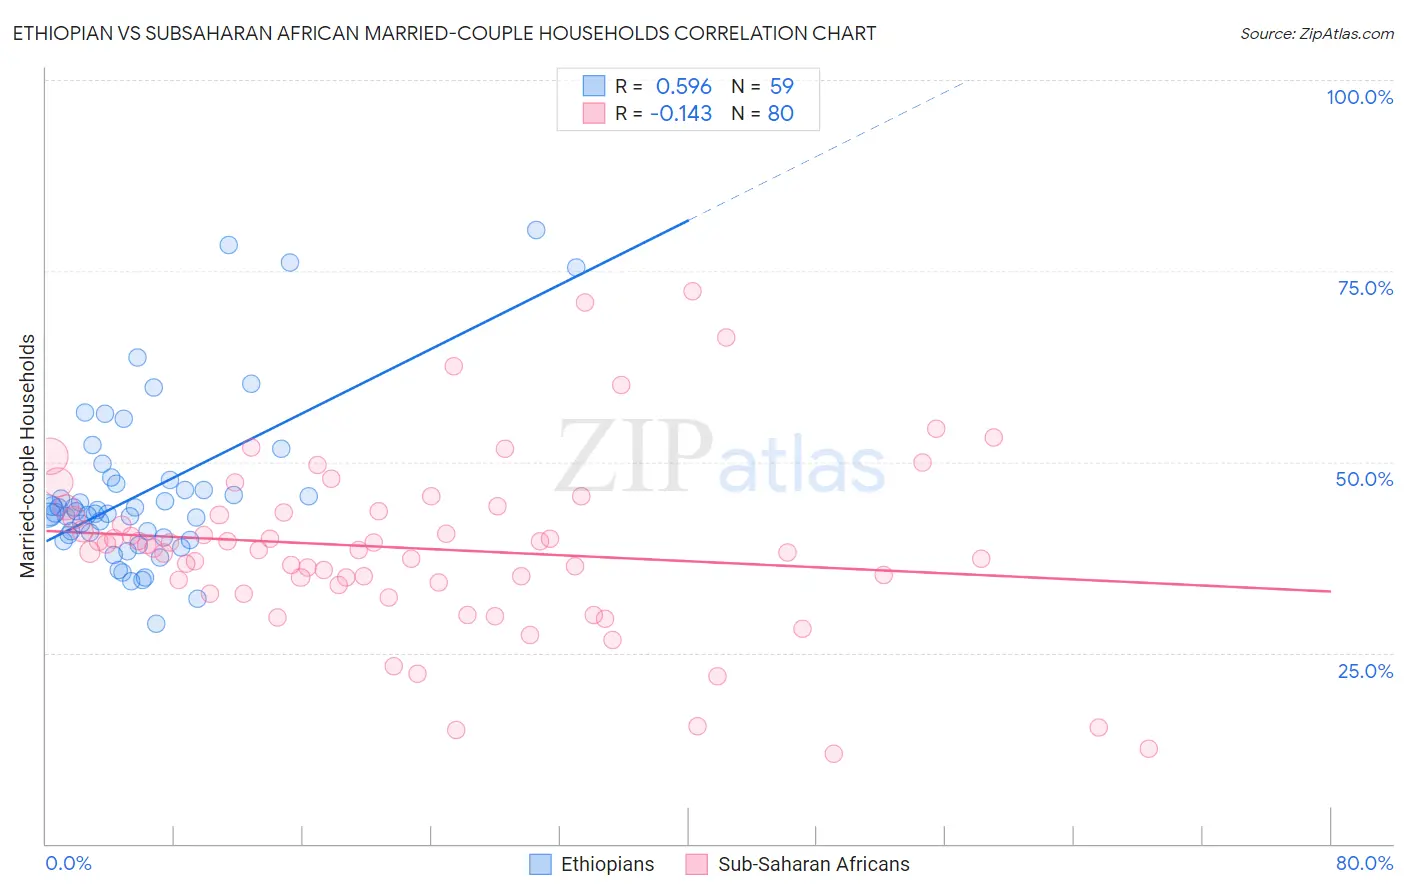 Ethiopian vs Subsaharan African Married-couple Households